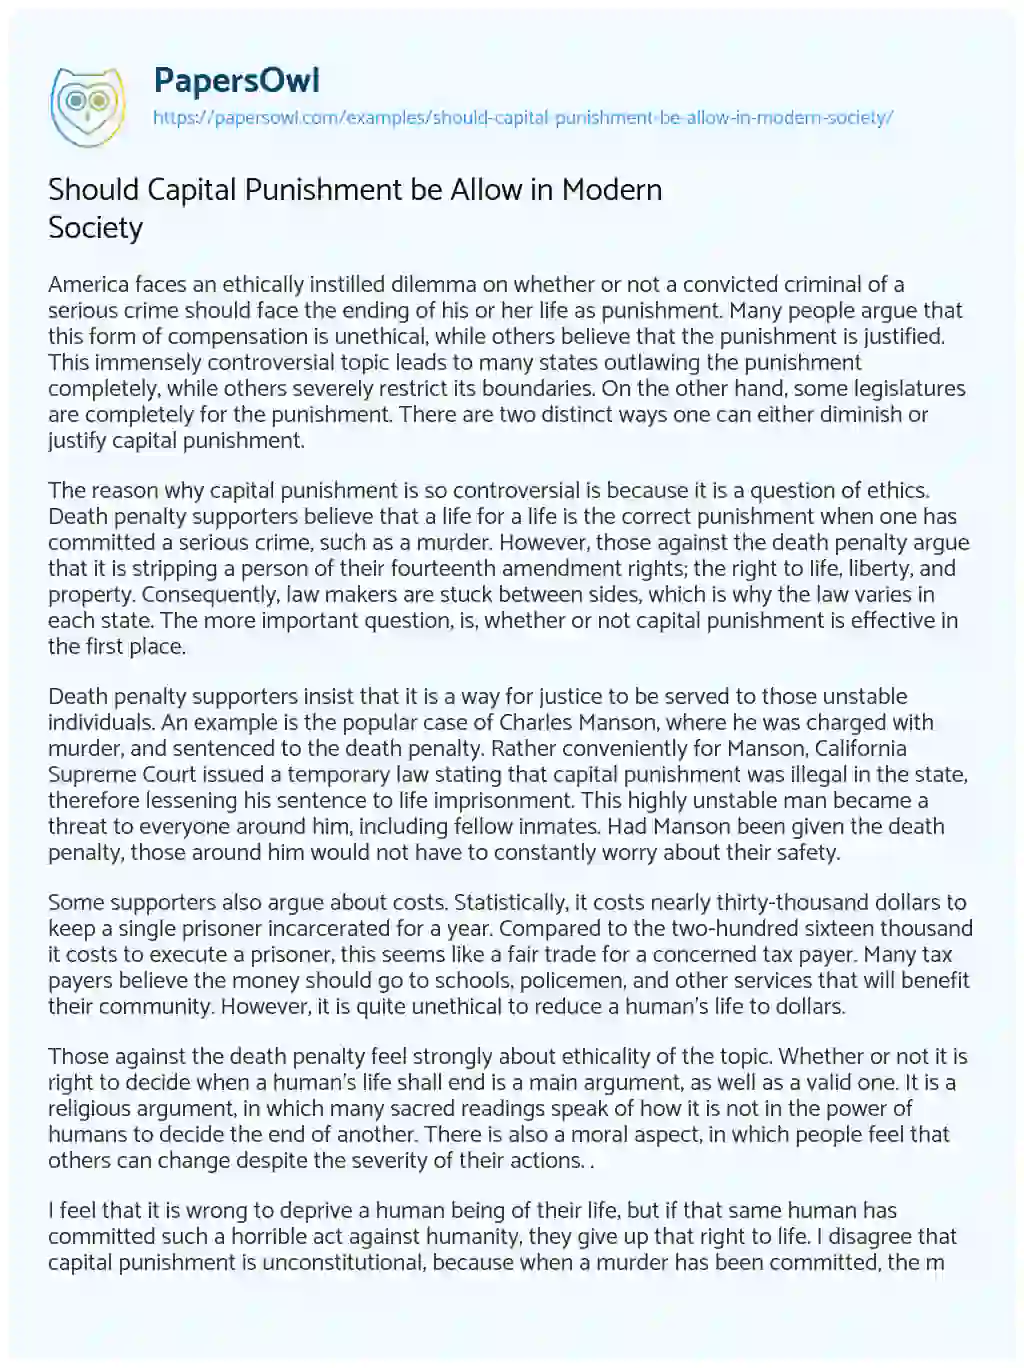 Essay on Should Capital Punishment be Allow in Modern Society